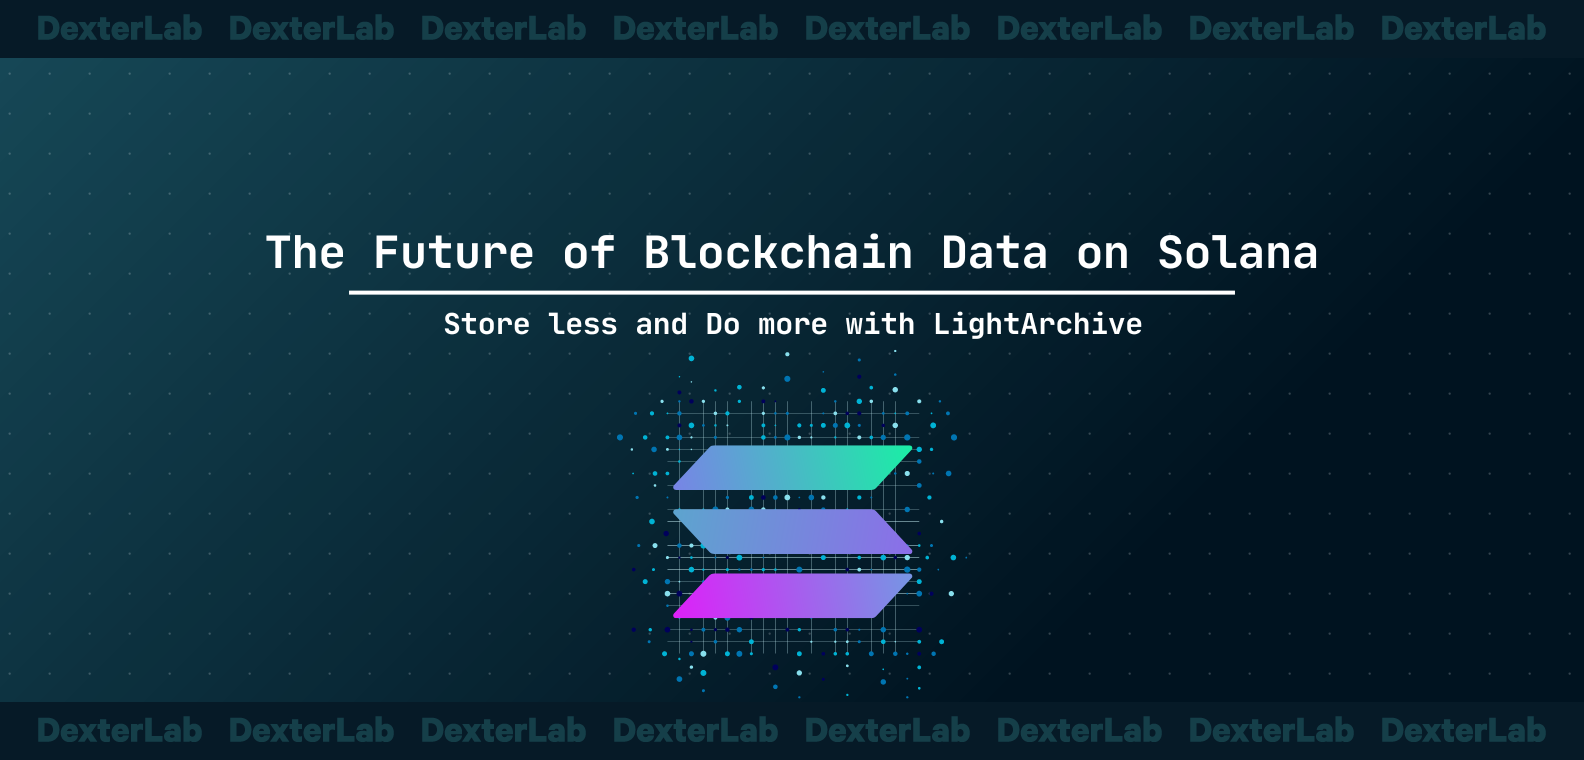 Future of Blockchain on Solana: Store Less, Do More with LightArchive